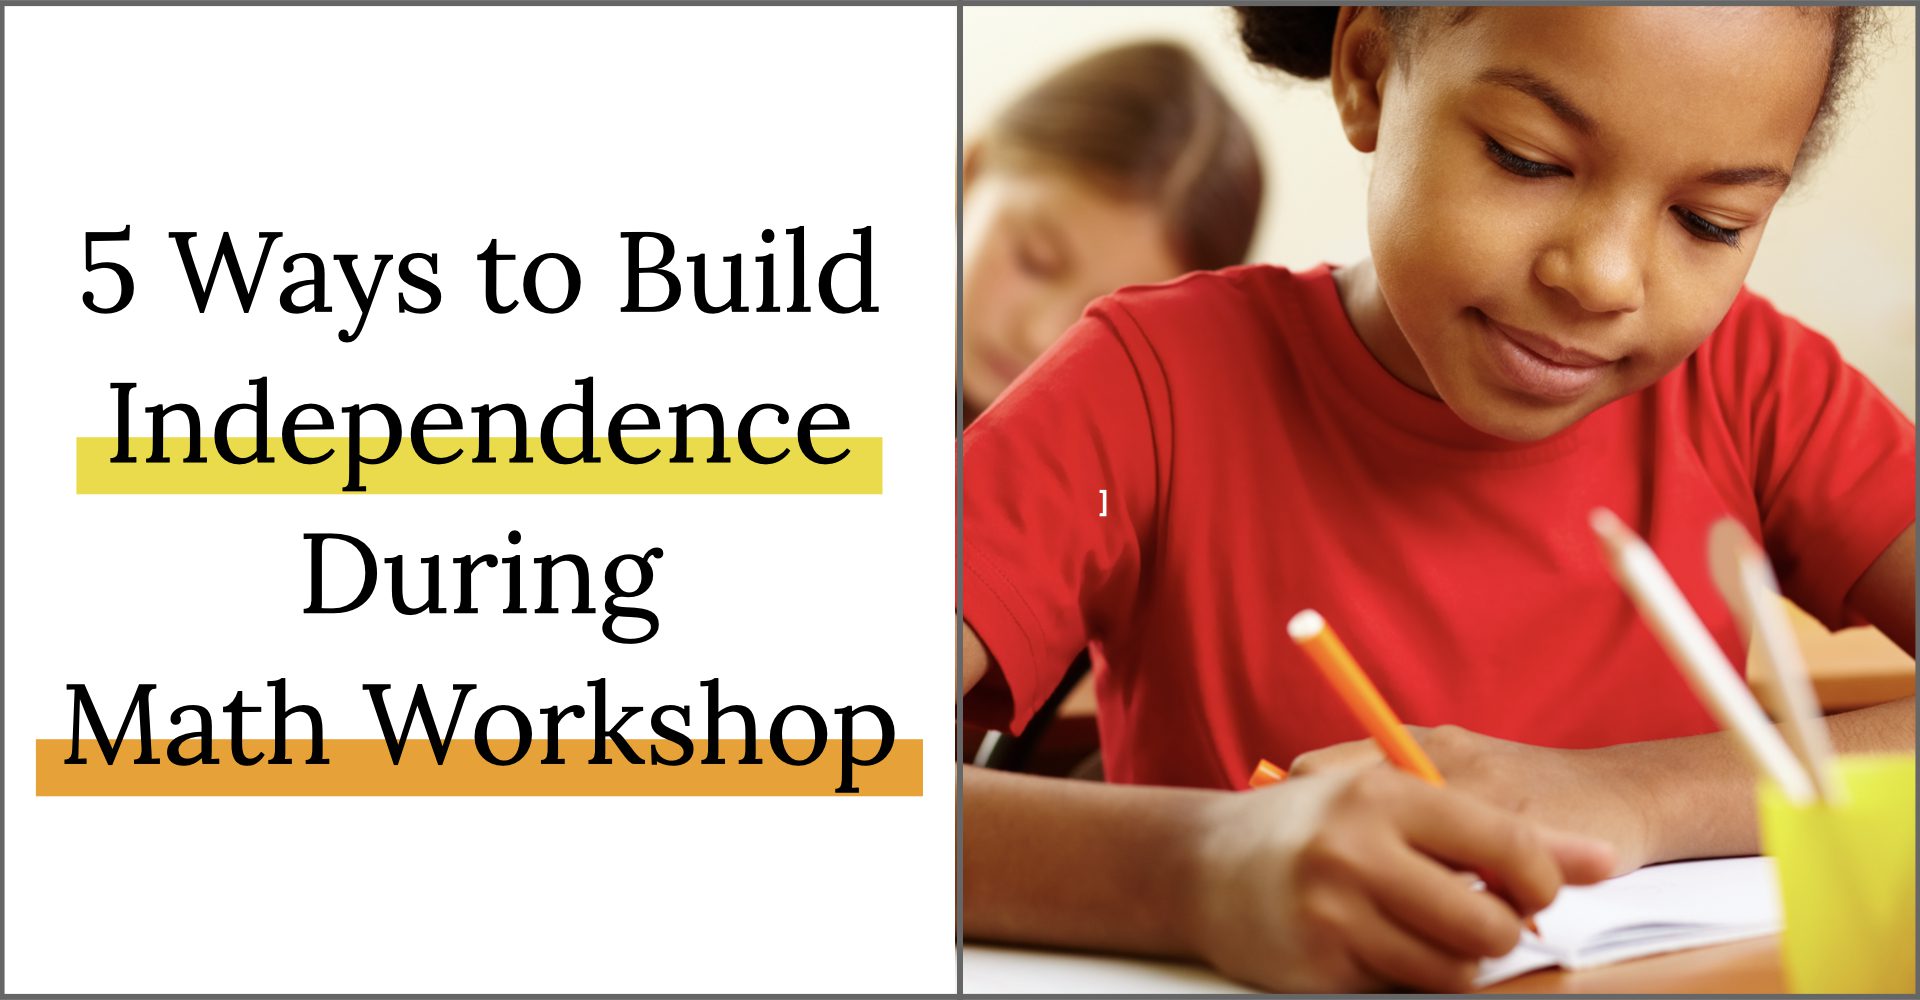 how does homework help build independence